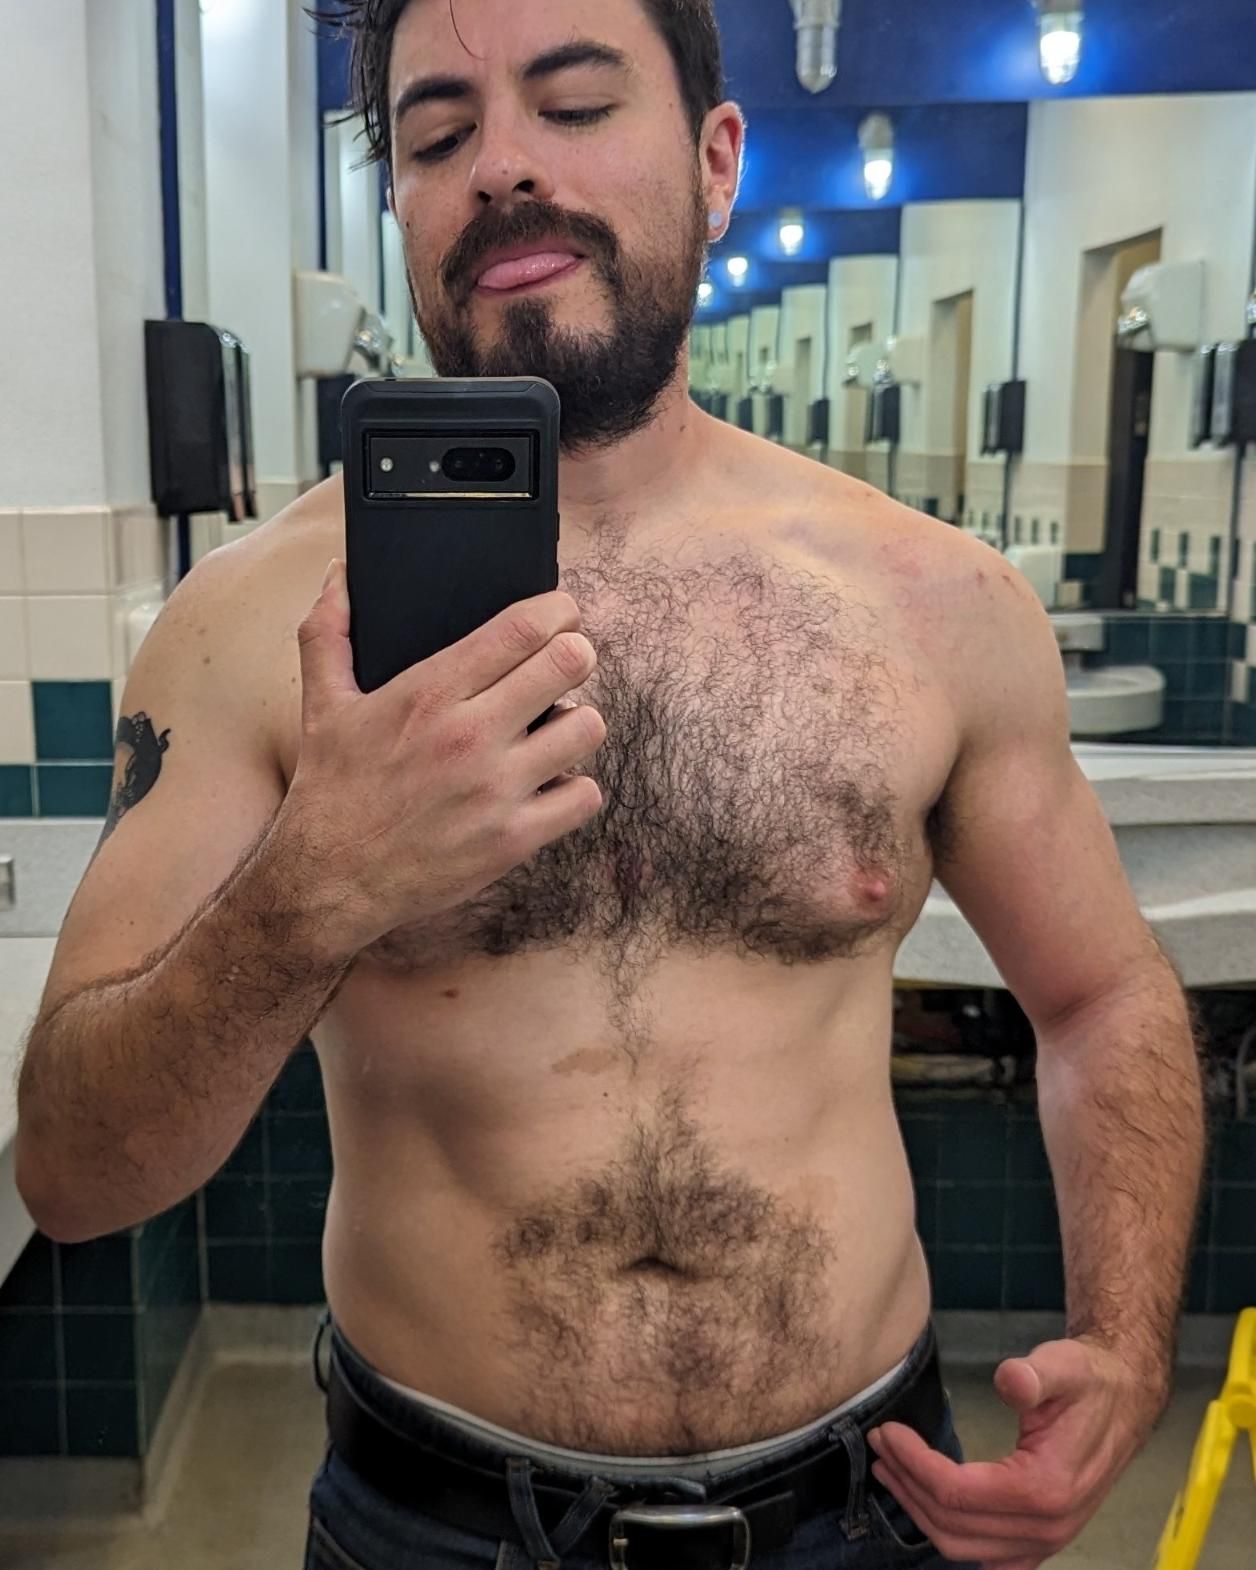 It's time for a gym selfie on main now with enhanced c** g*****s.